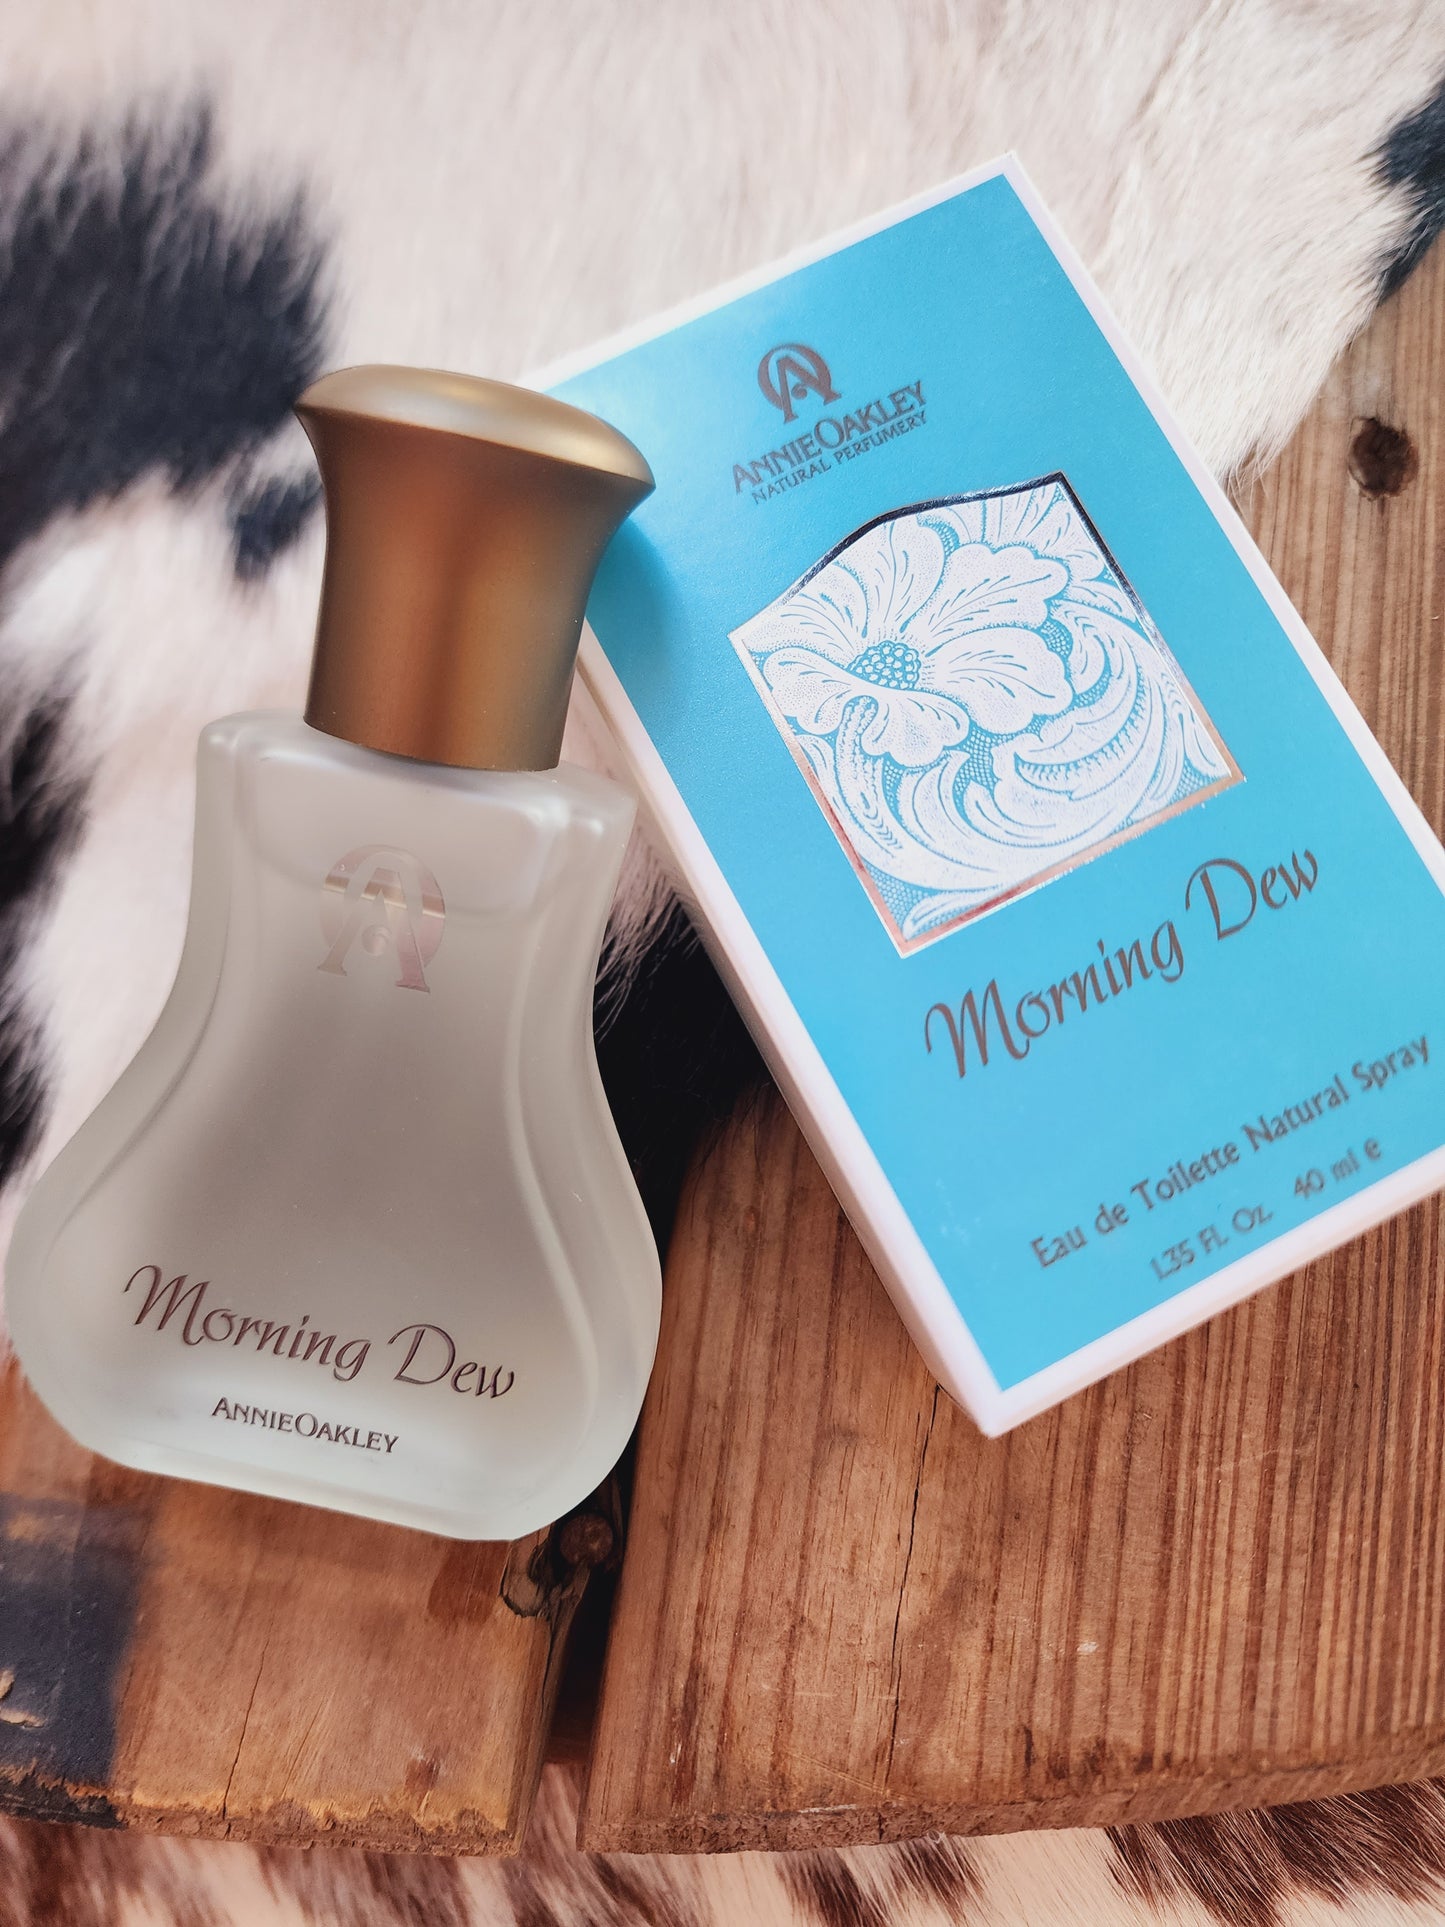 Morning Dew - Annie Oakley Women’s natural perfume